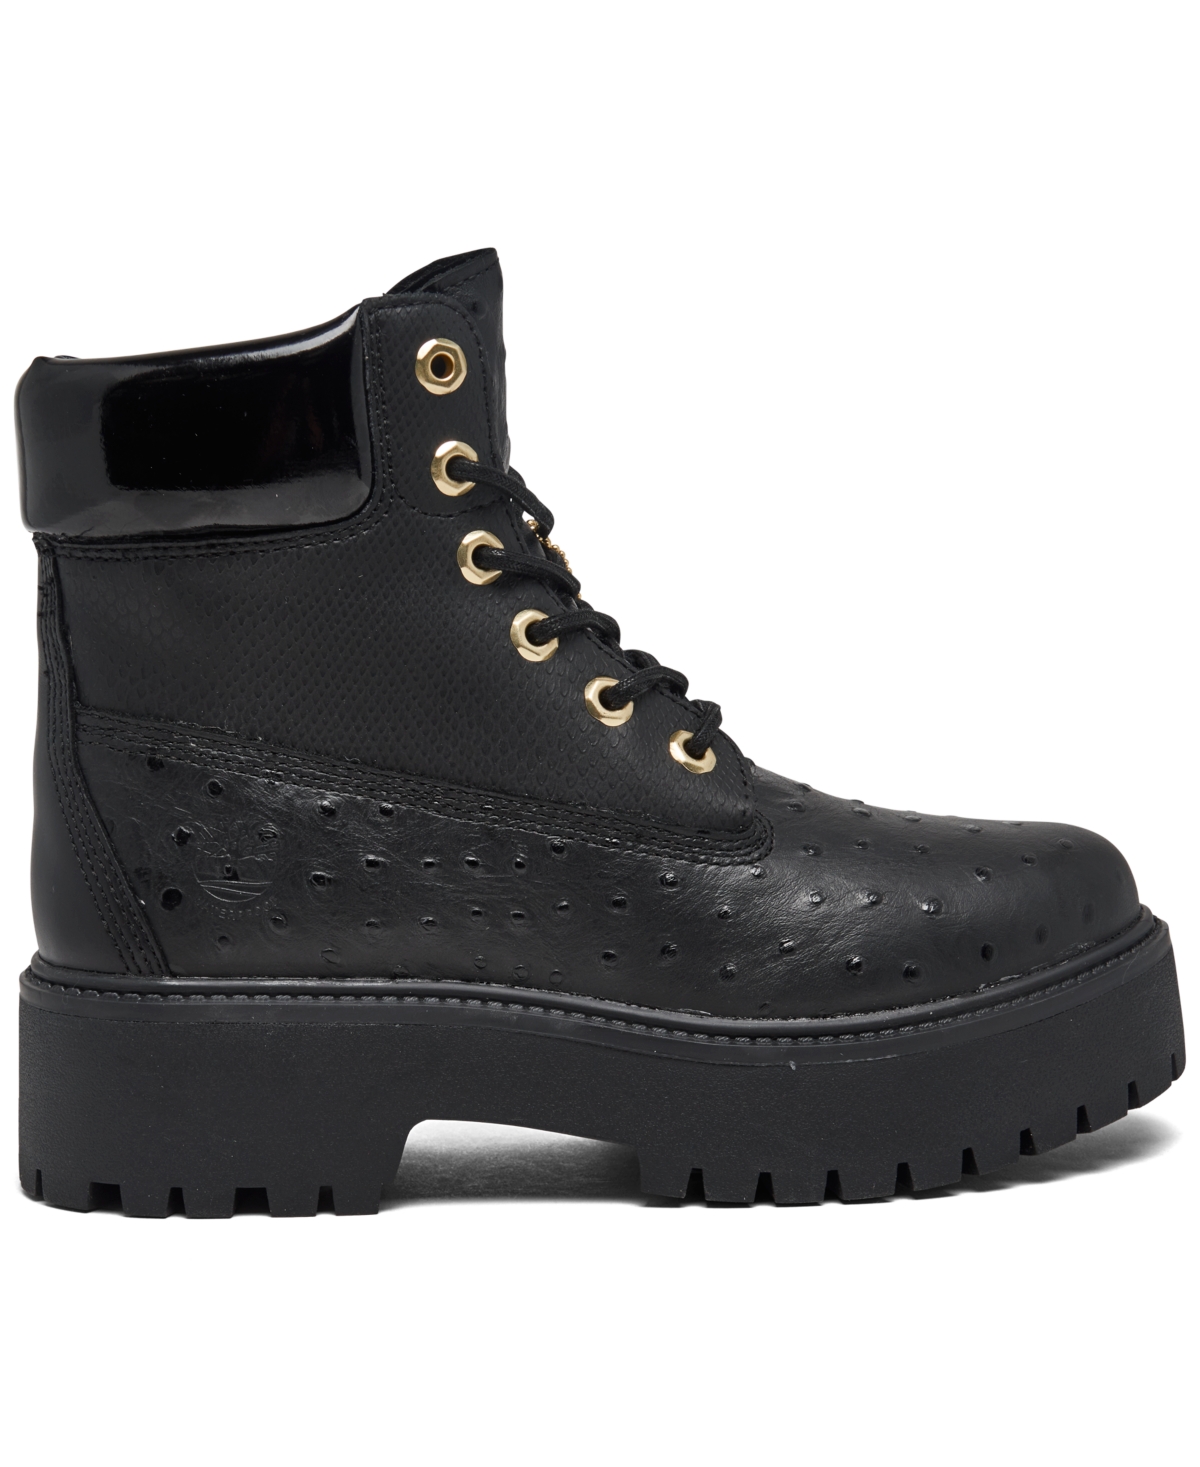 Shop Timberland Women's Stone Street 6" Water-resistant Platform Boots From Finish Line In Jet Black